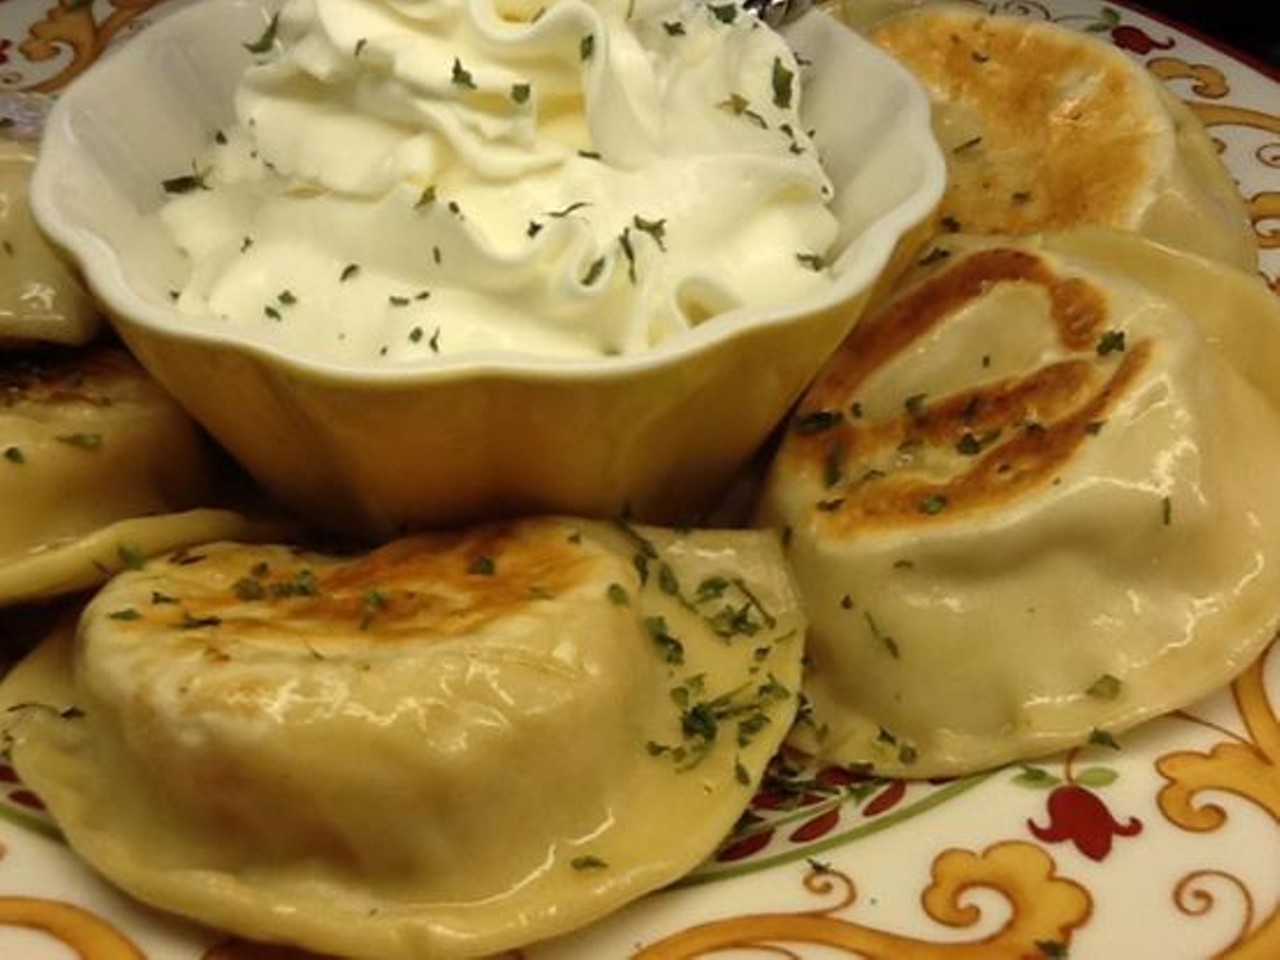 100 percent worth the drive, "POC" offers 27 gourmet inspired selections of pierogies. Sold in a six pack, "POC" is a great place to grab some authentic pierogies to enjoy at home. Try the "Sloppy Joe" pierogi. Stop in at Pierogies of Cleveland
4131 W. Streetsboro Rd., Richfield, 330.659.4309.